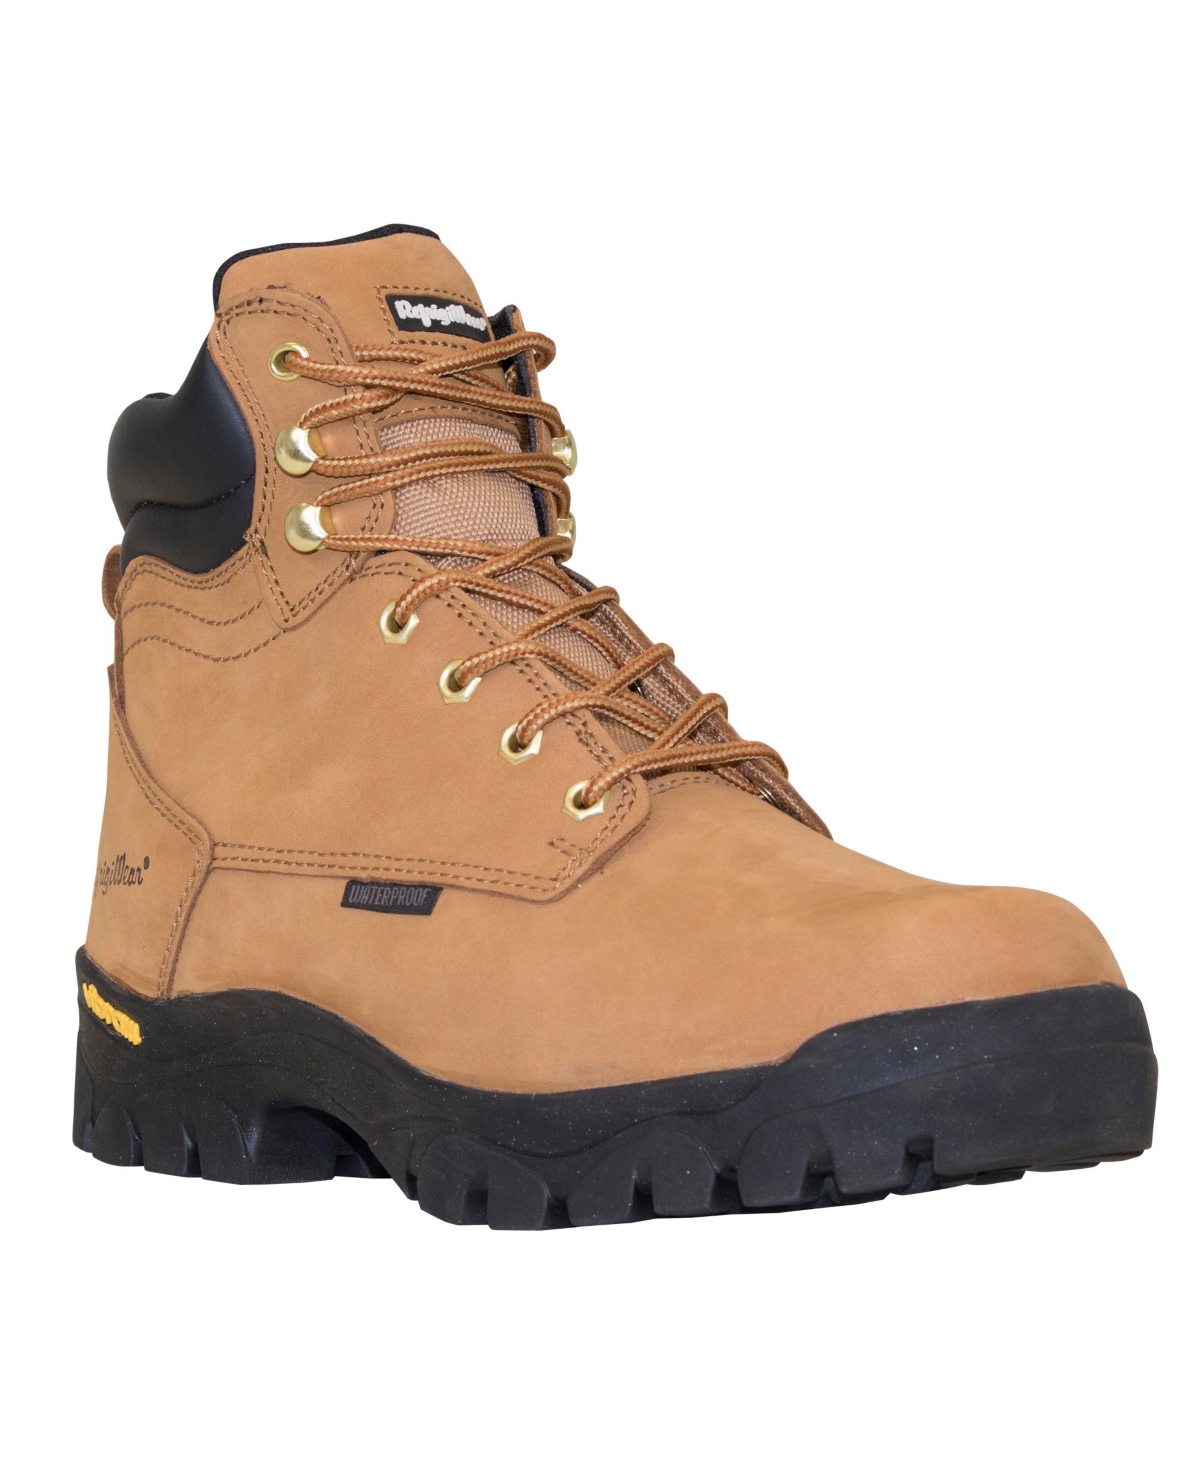 Men's Ice Logger Warm Insulated Waterproof Tan Leather Work Boots - Tan